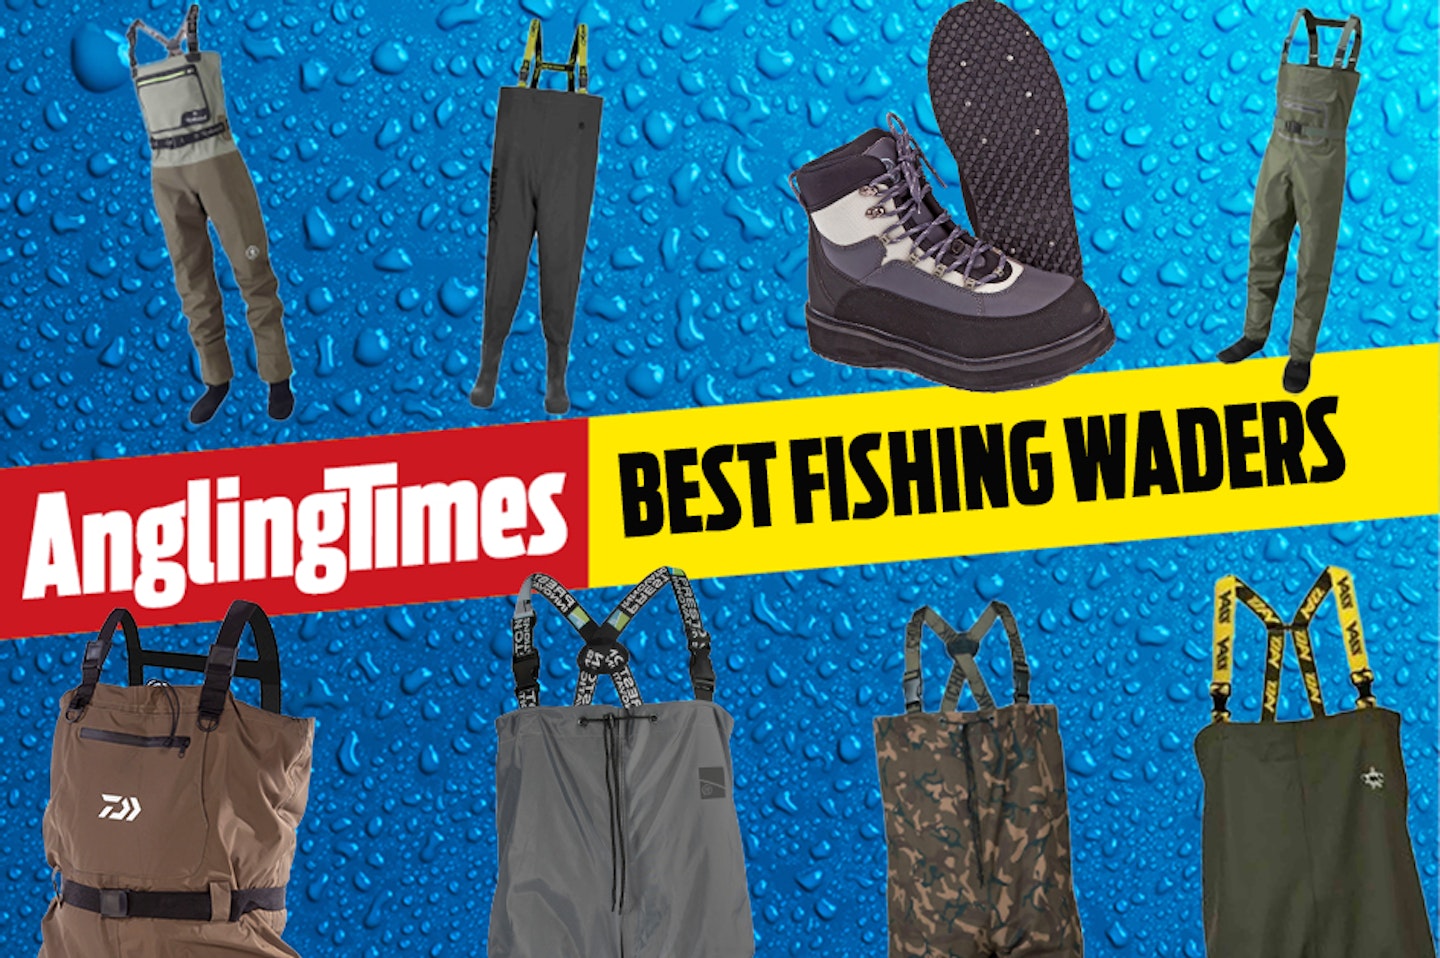 The best fishing waders